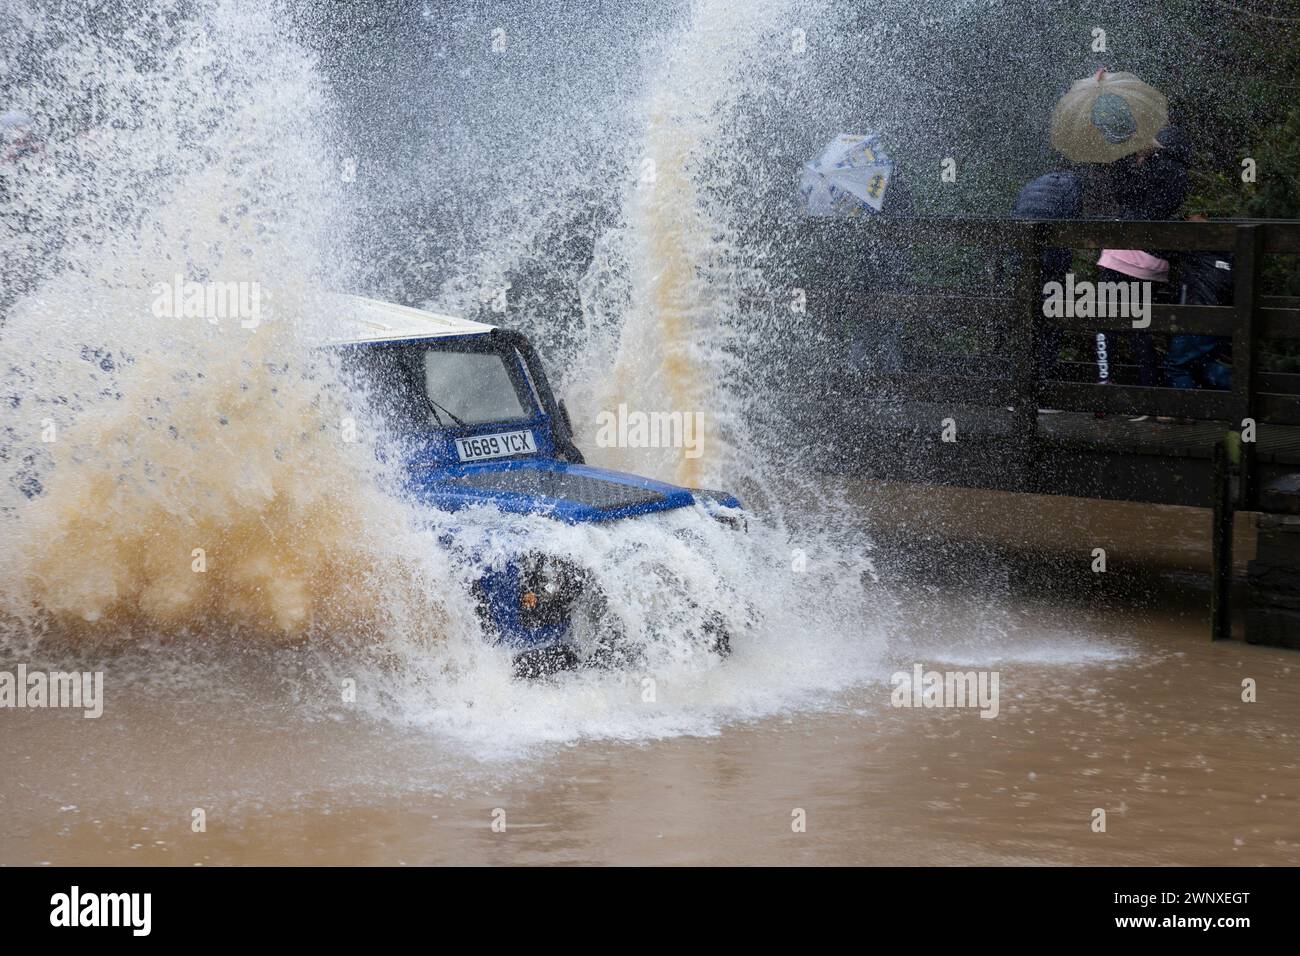 20/02/22   Land Rover Defender splashes spectators with only umbrellas fro defence..  As heavy rain and river levels rise, more than sixty spectators Stock Photo